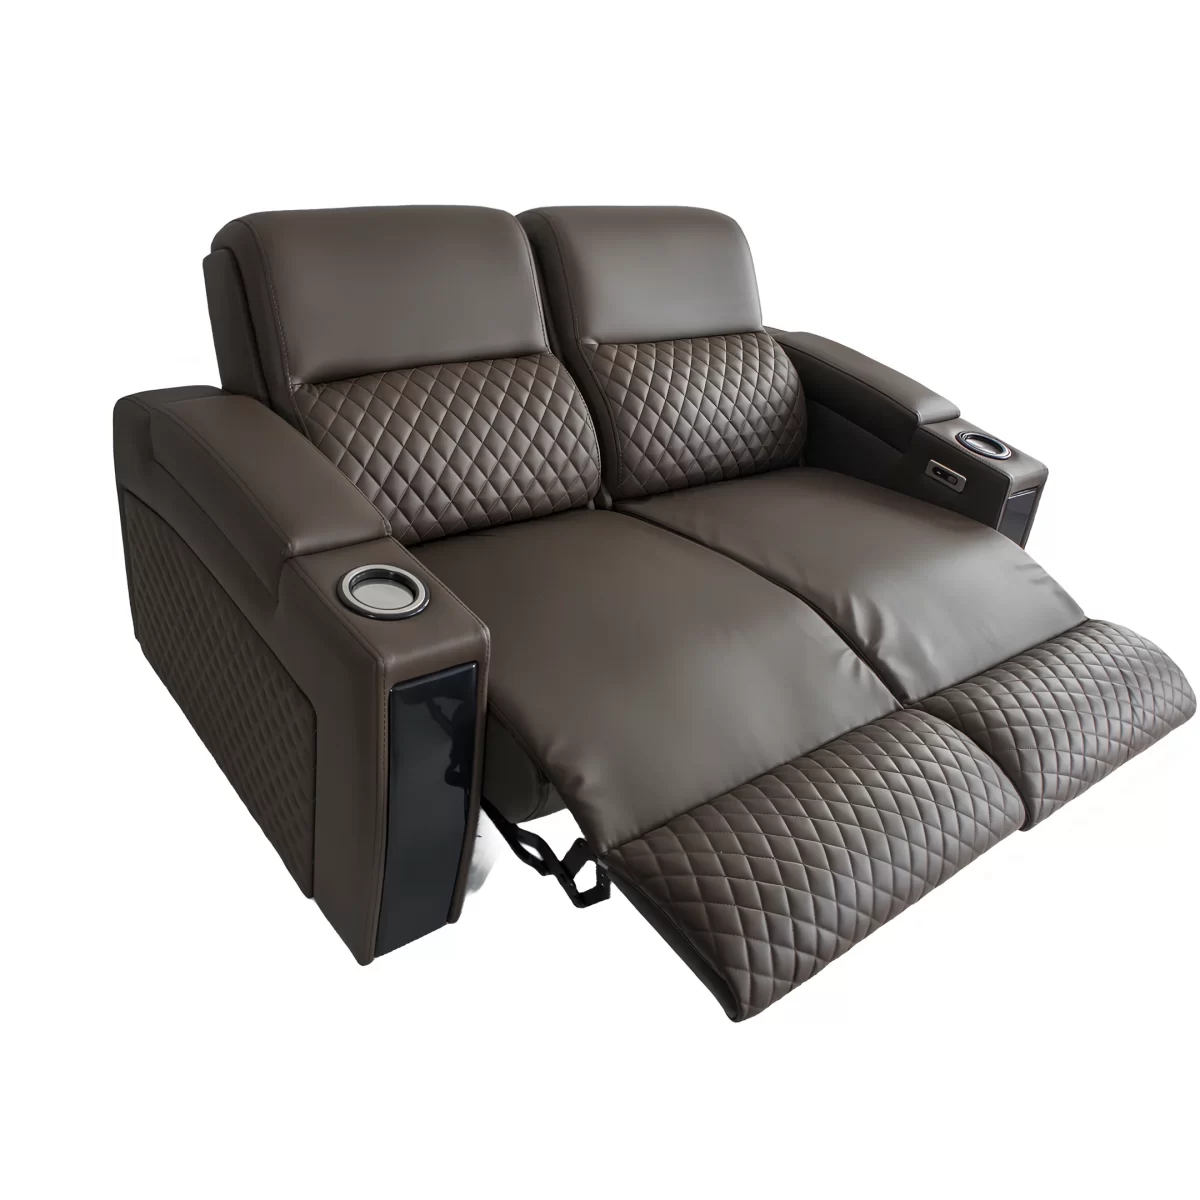 palma double reclining sofa electric recliner for home theater loveseat 5